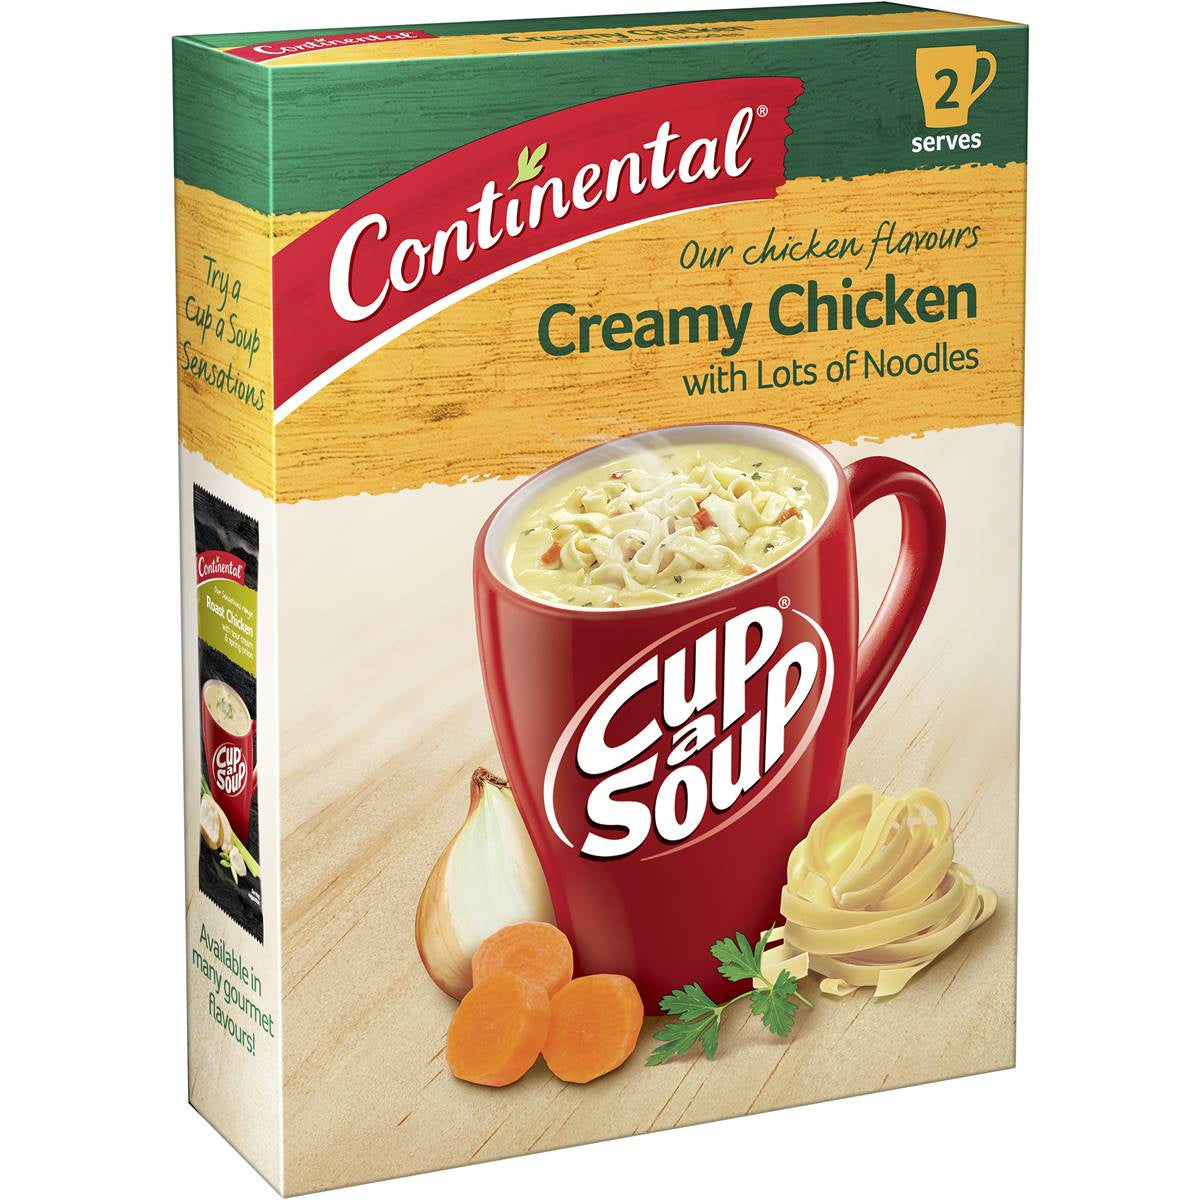 Continental Cup a Soup Creamy Chicken Lots of Noodles 2pk